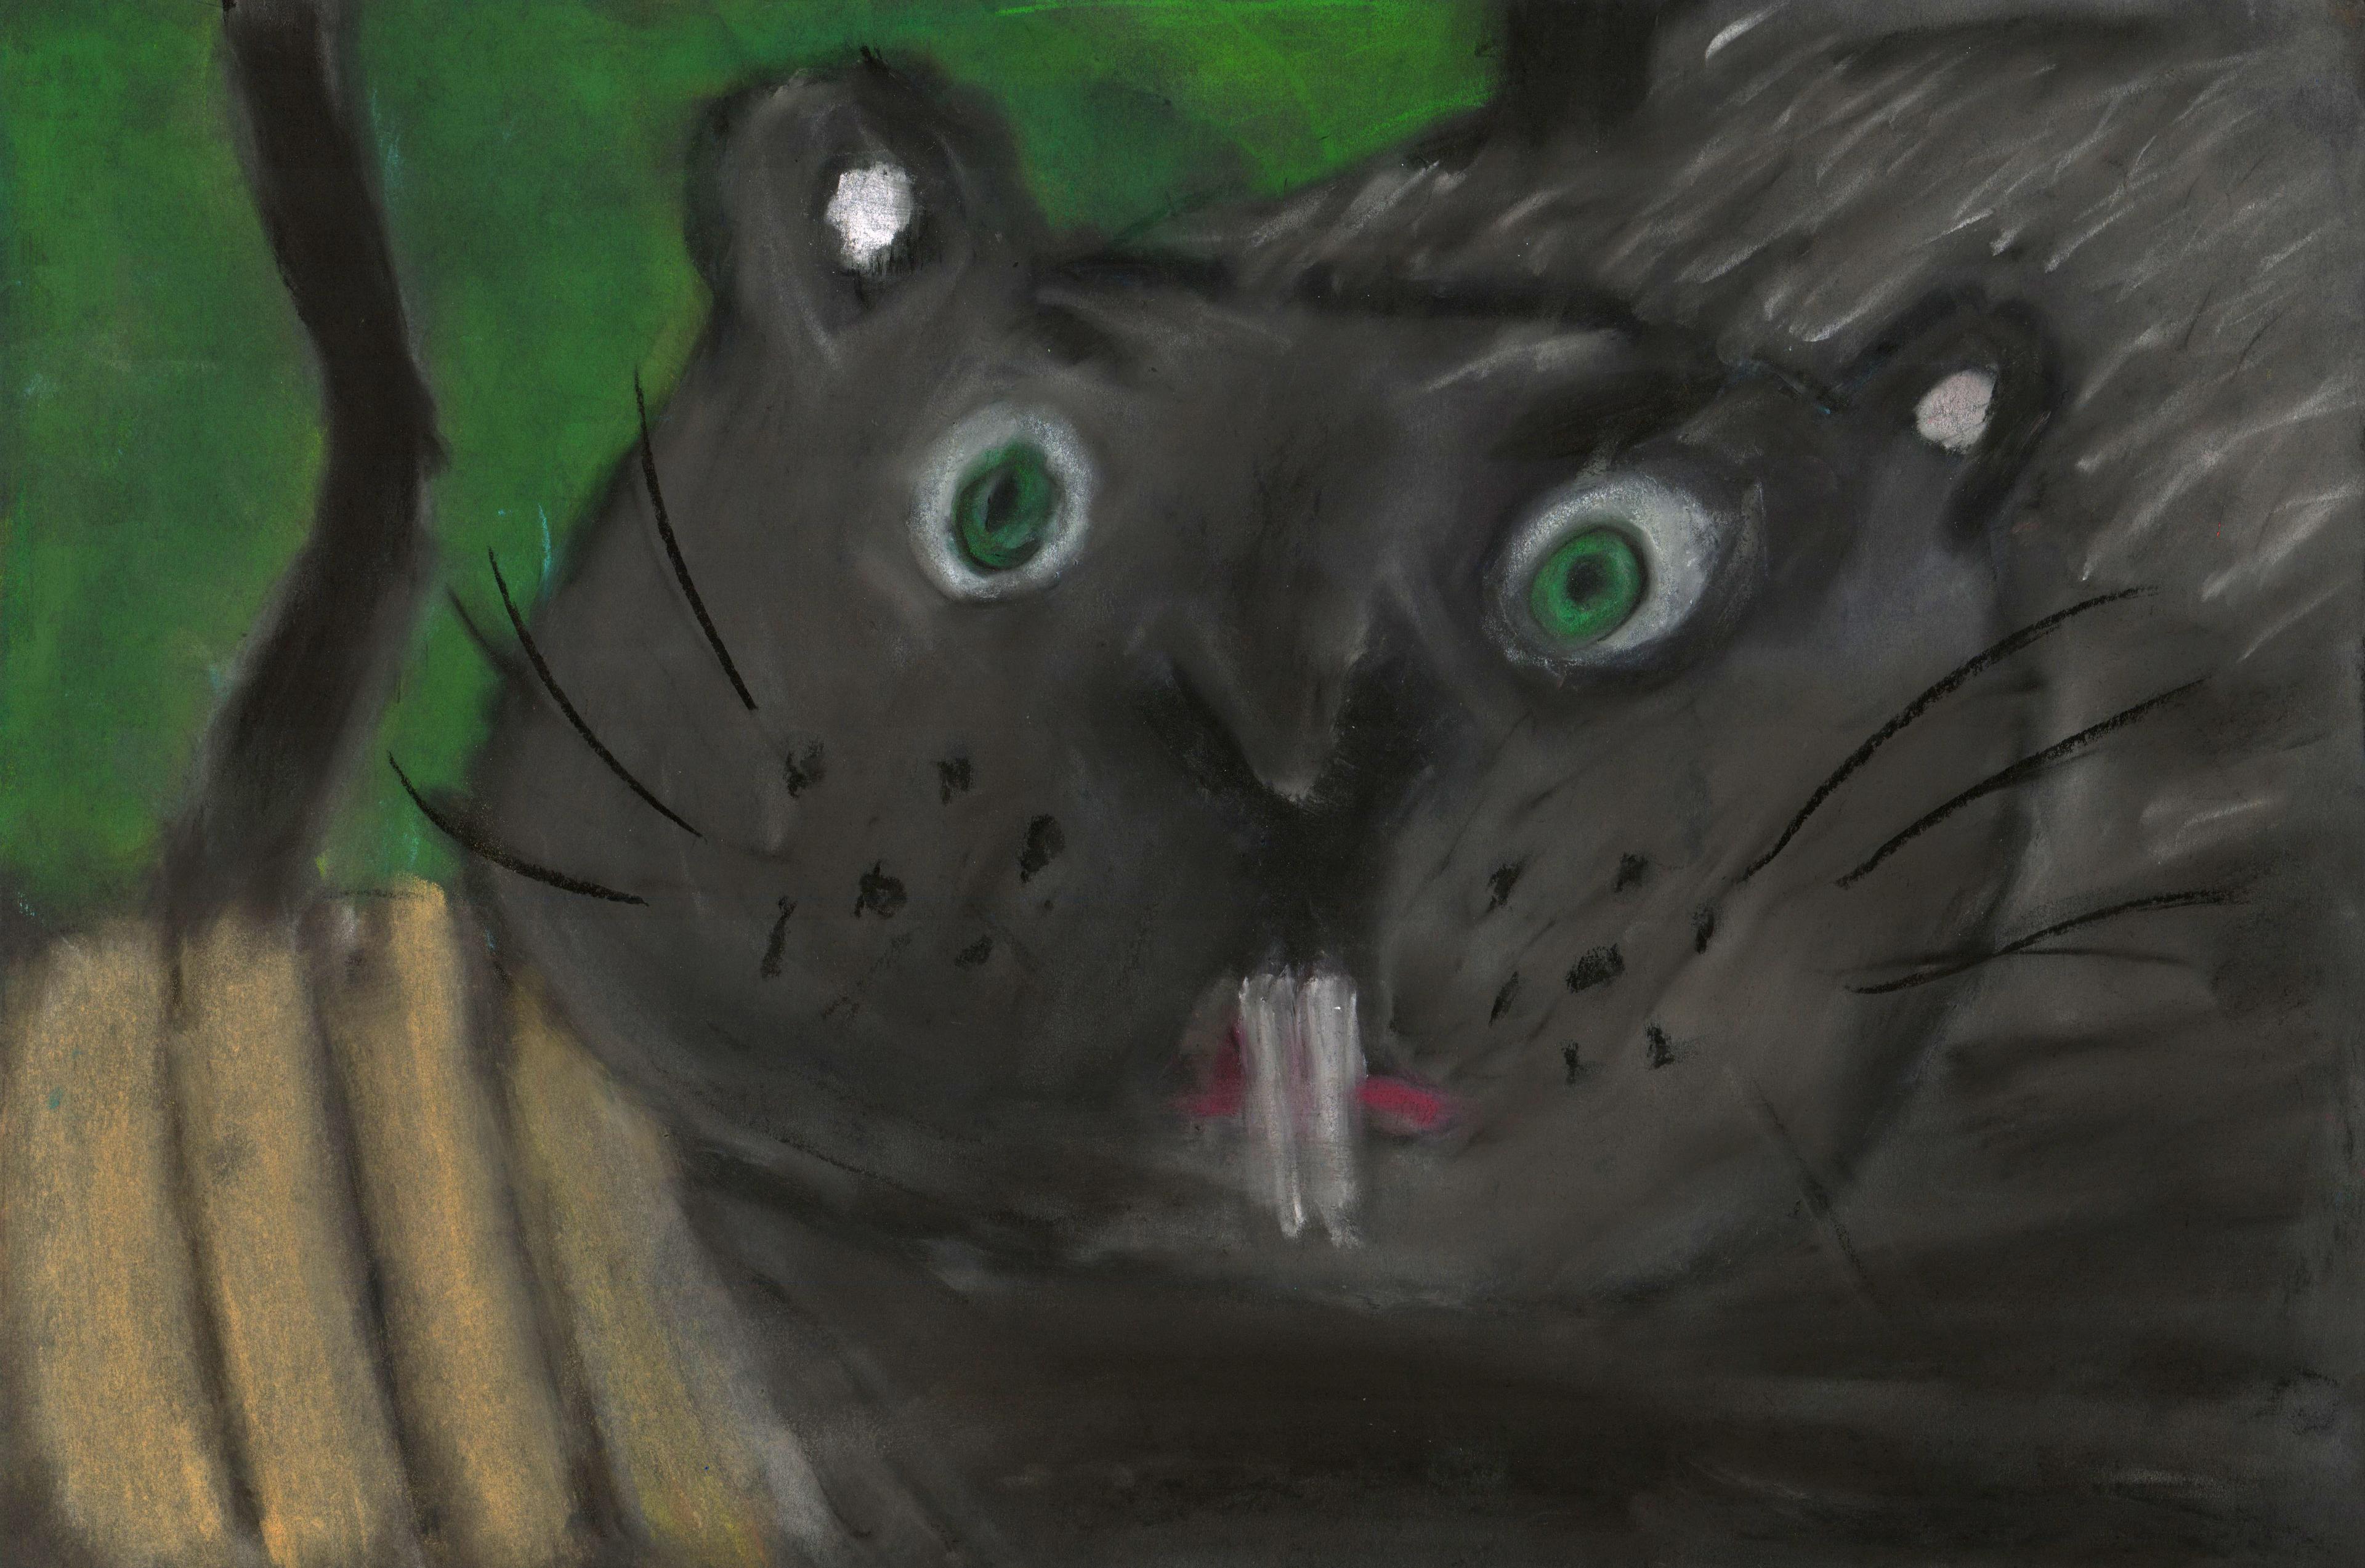 Chalk pastel portrait of a black beaver with wide green eyes and long, white front teeth. The beaver is facing the viewer and appears in front of a light brown picket fence with greenery in the background. The beaver has an expression of surprise, and black whiskers stick out from its cheeks on either side of its face.